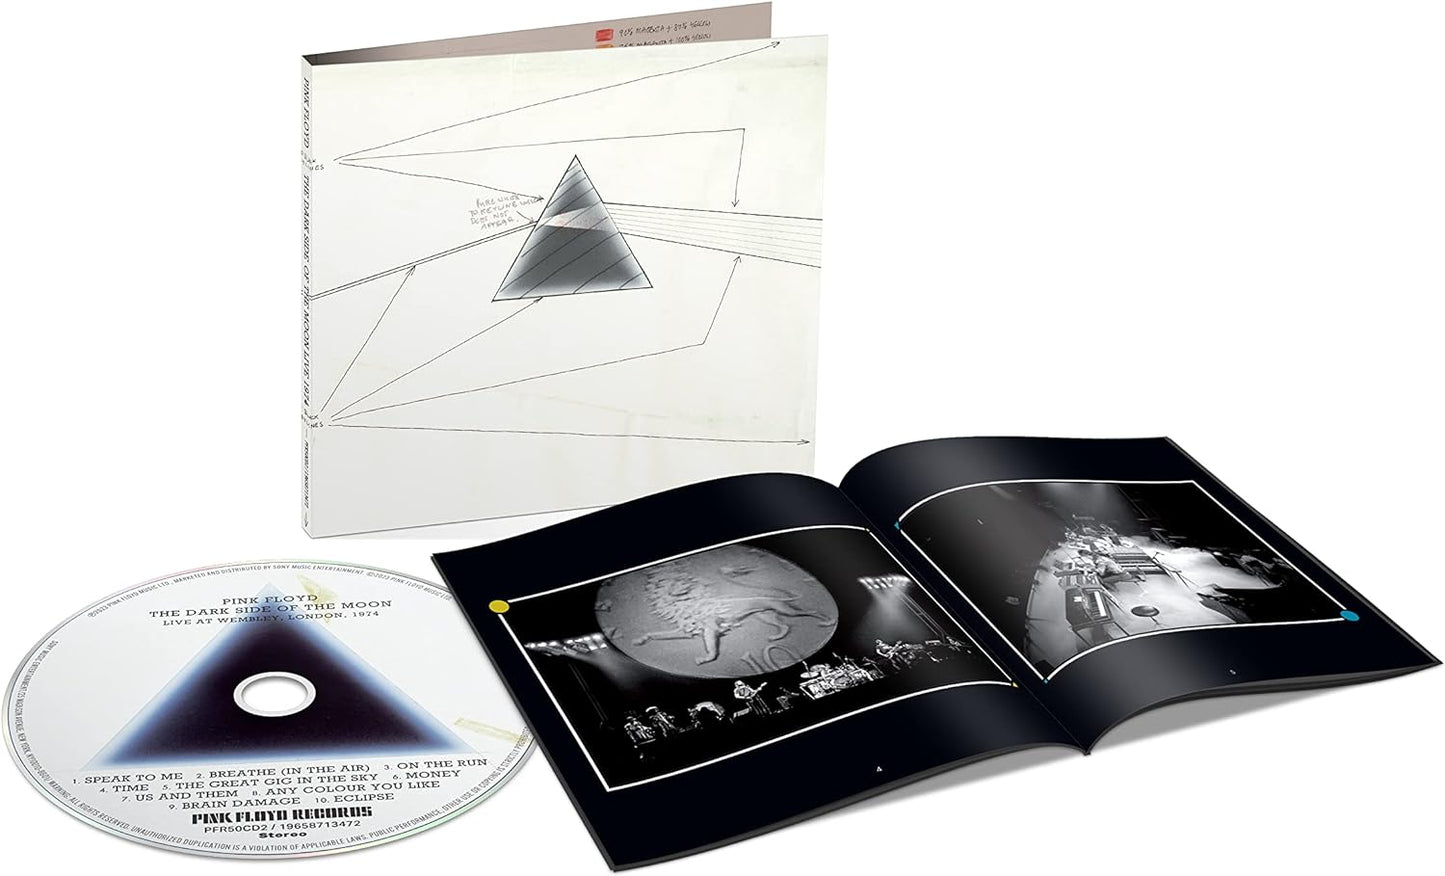 Pink Floyd - The Dark Side Of The Moon - Live At Wembley 1974 CD